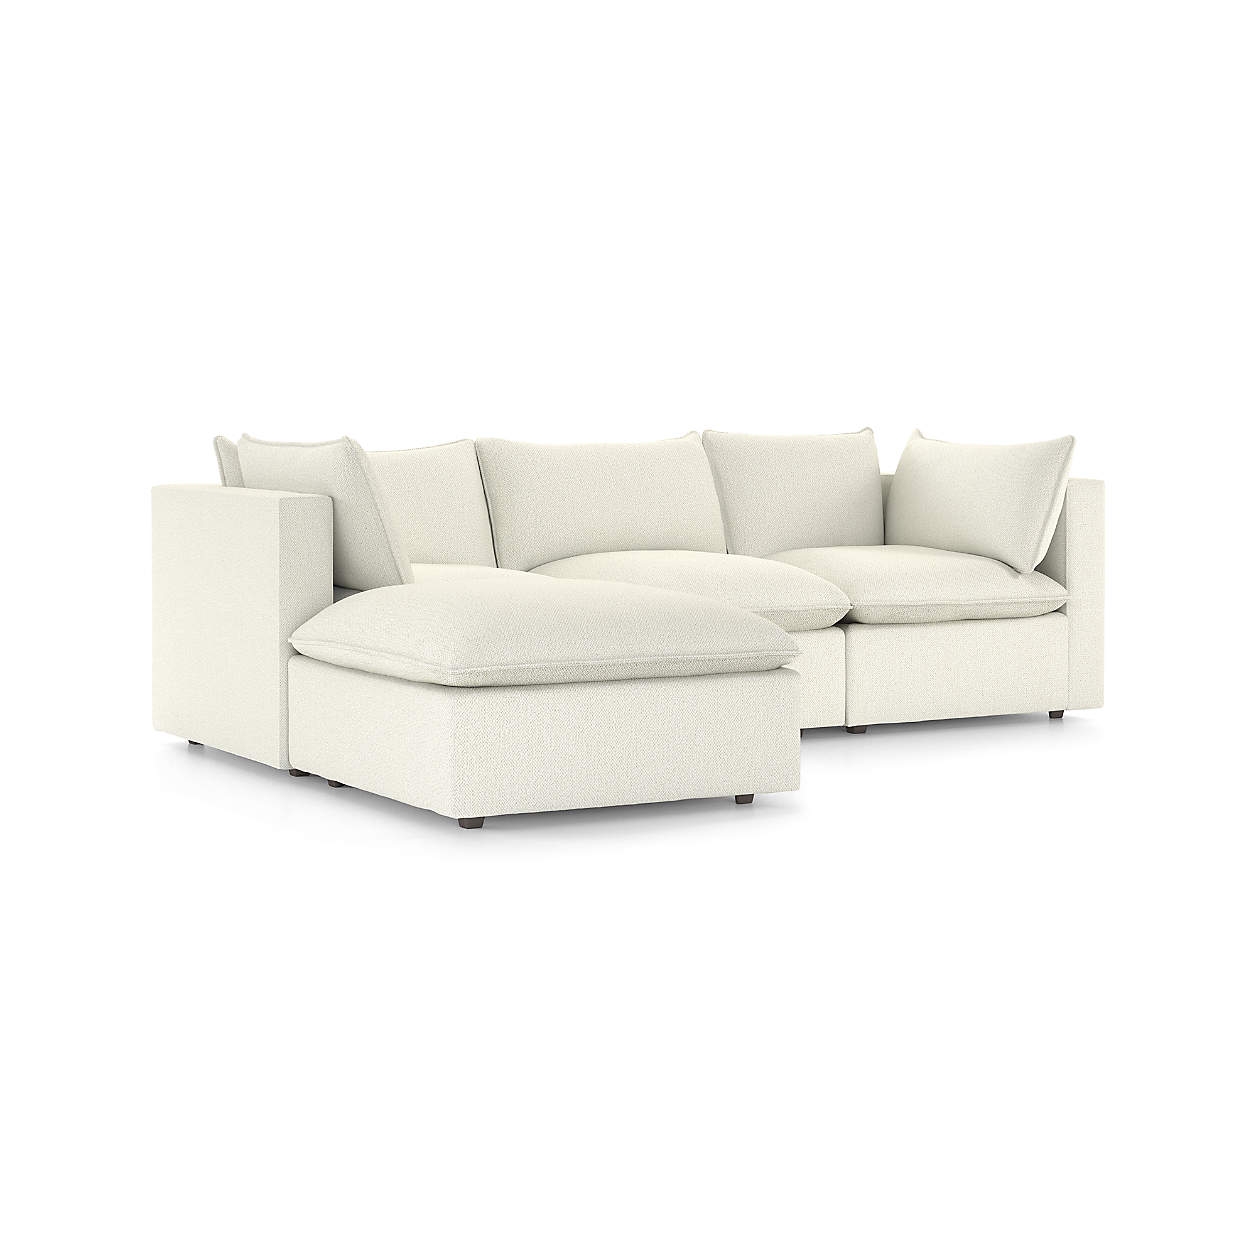 Lotus Deep 4-Piece Reversible Sectional with Ottoman - Image 1